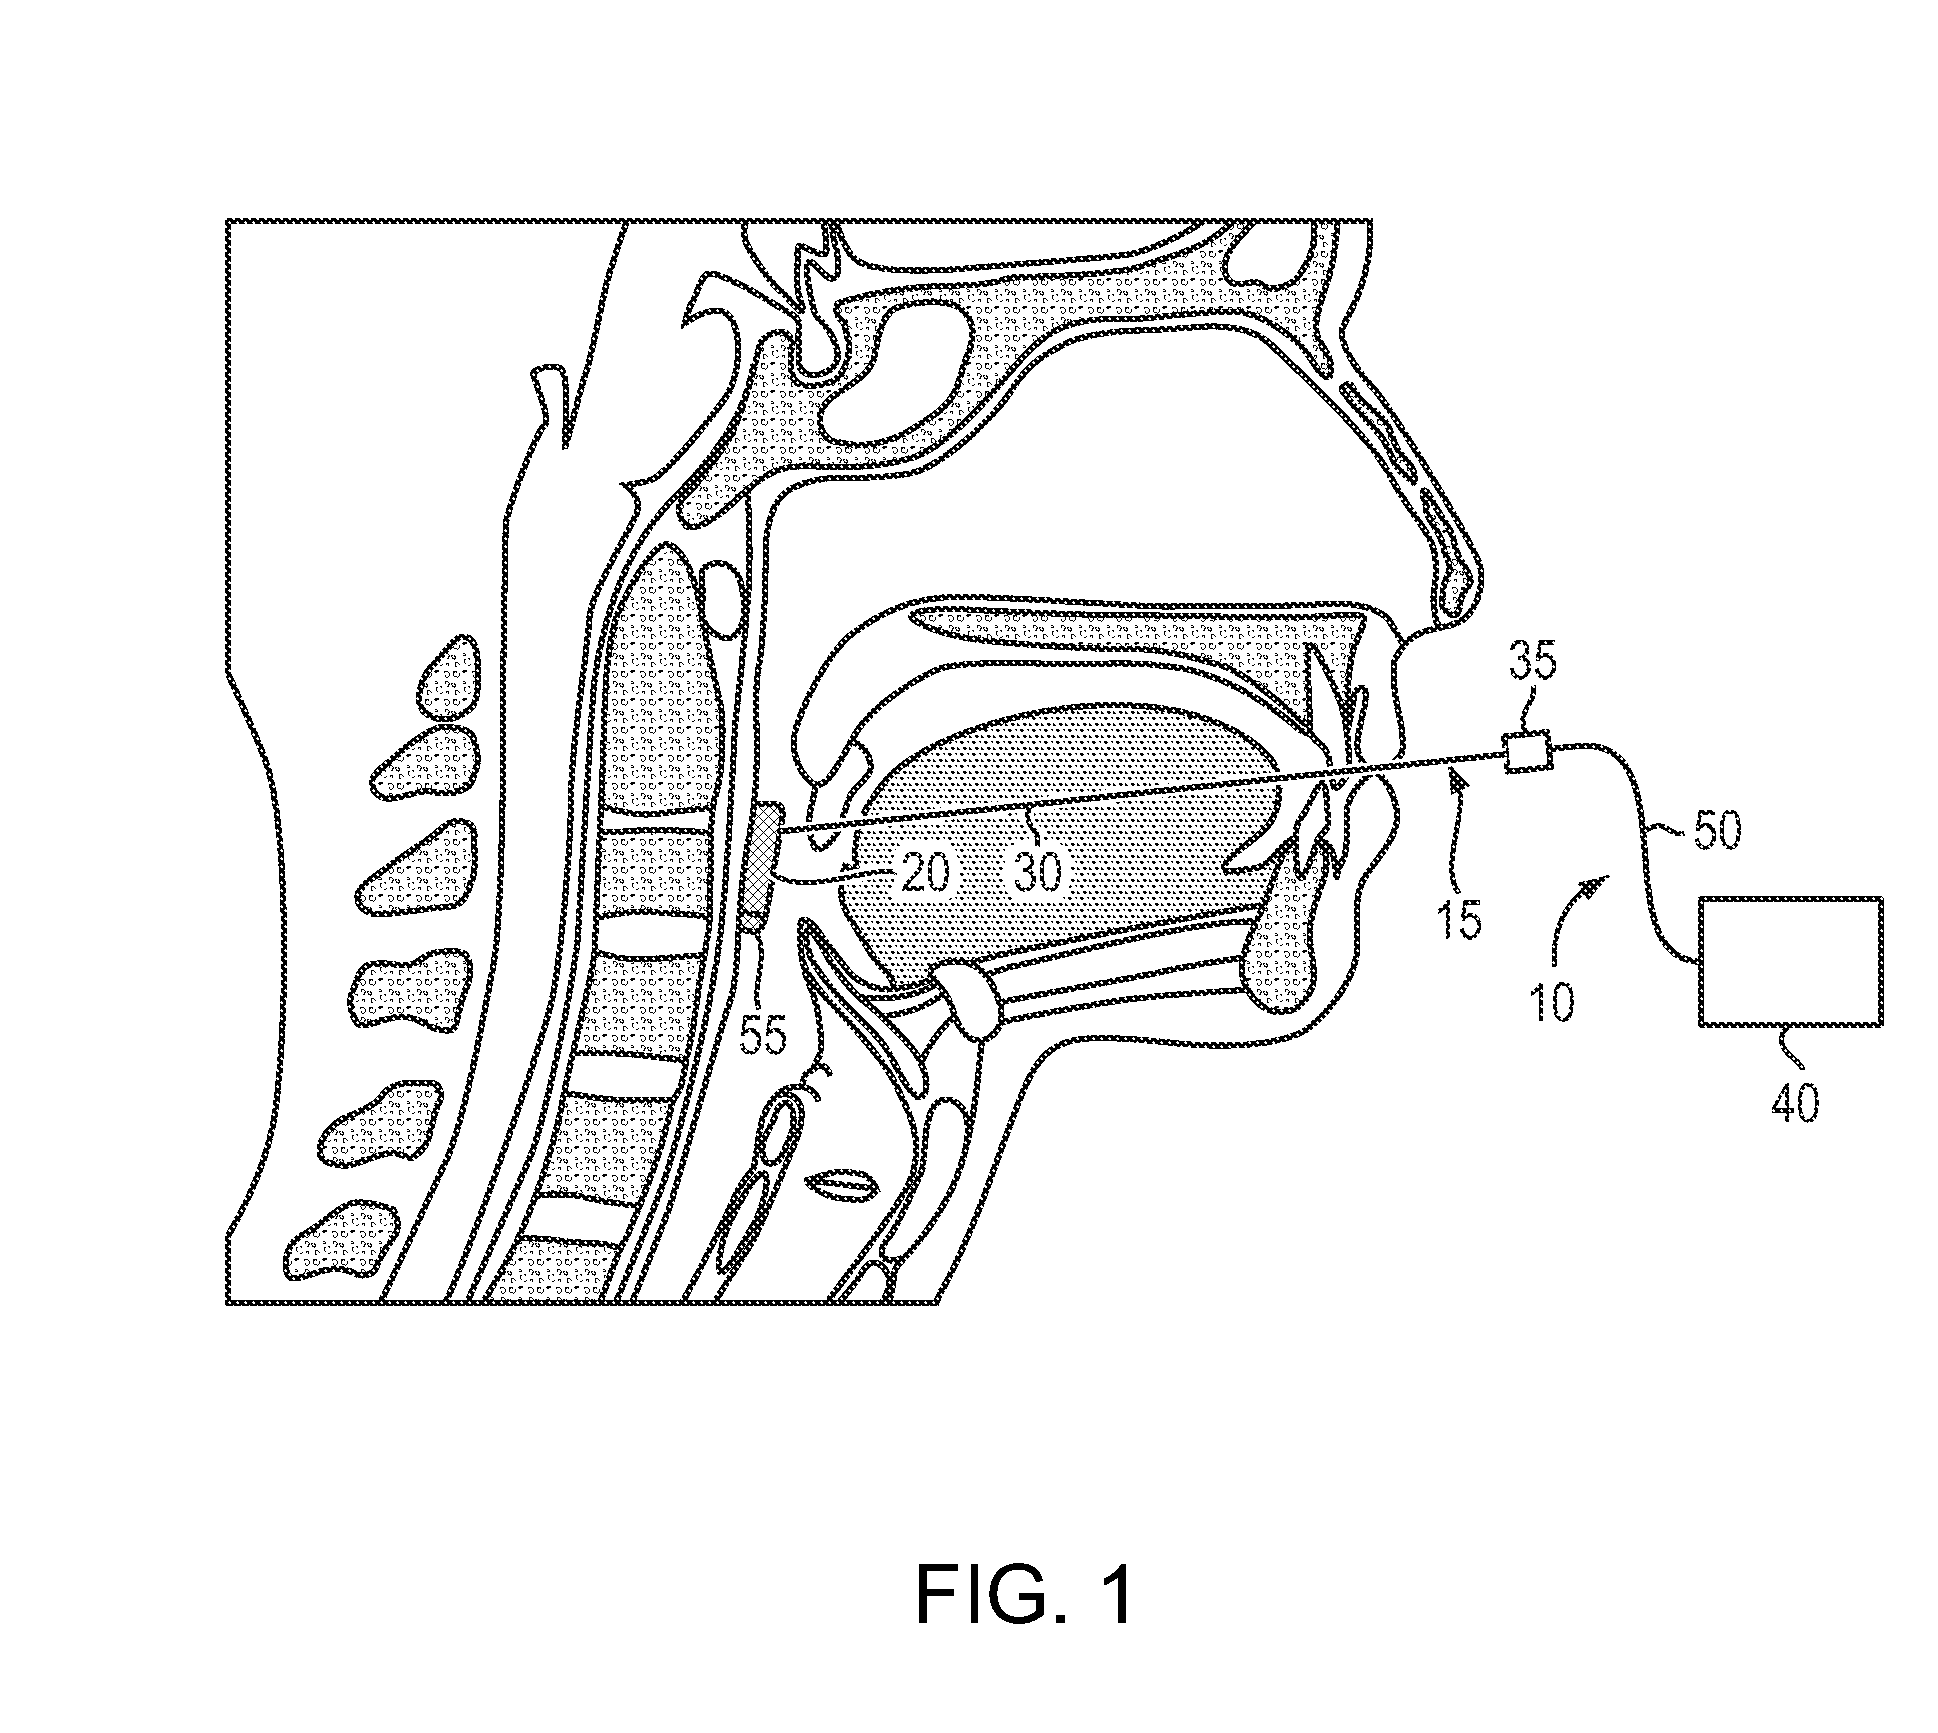 Apparatus and methods for treatment of obstructive sleep apnea utilizing cryolysis of adipose tissues